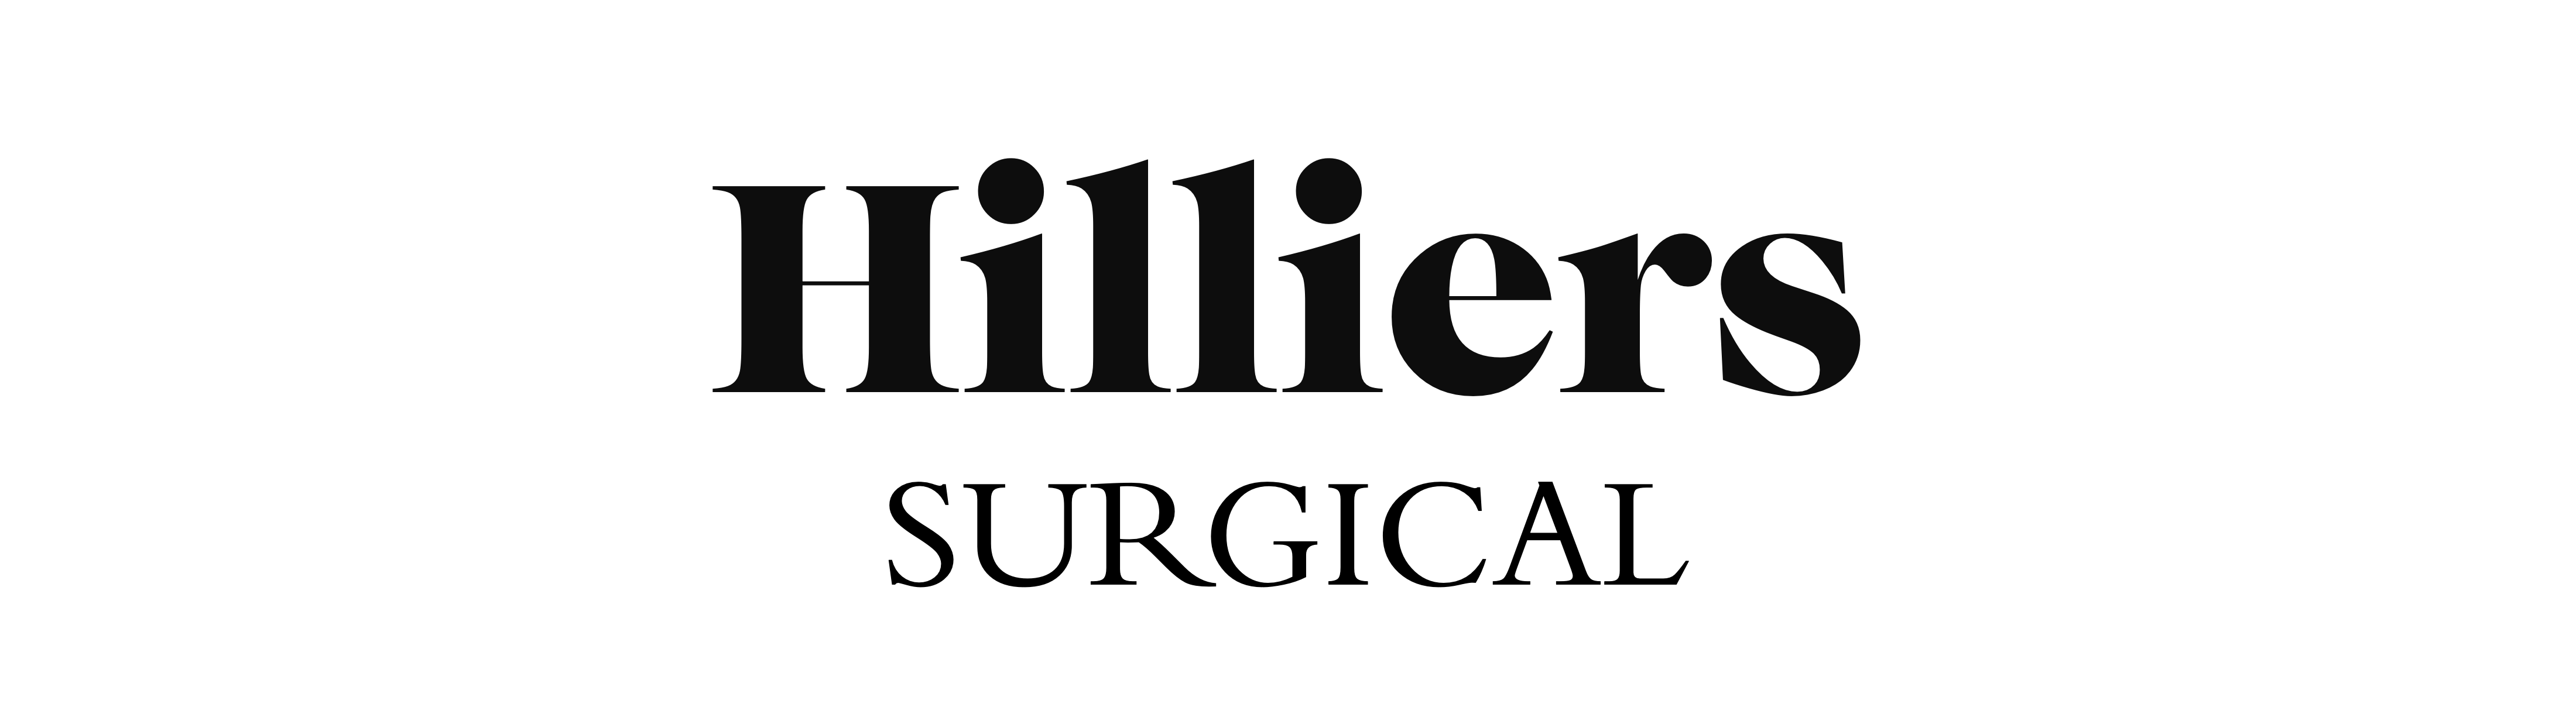 Hilliers Surgical